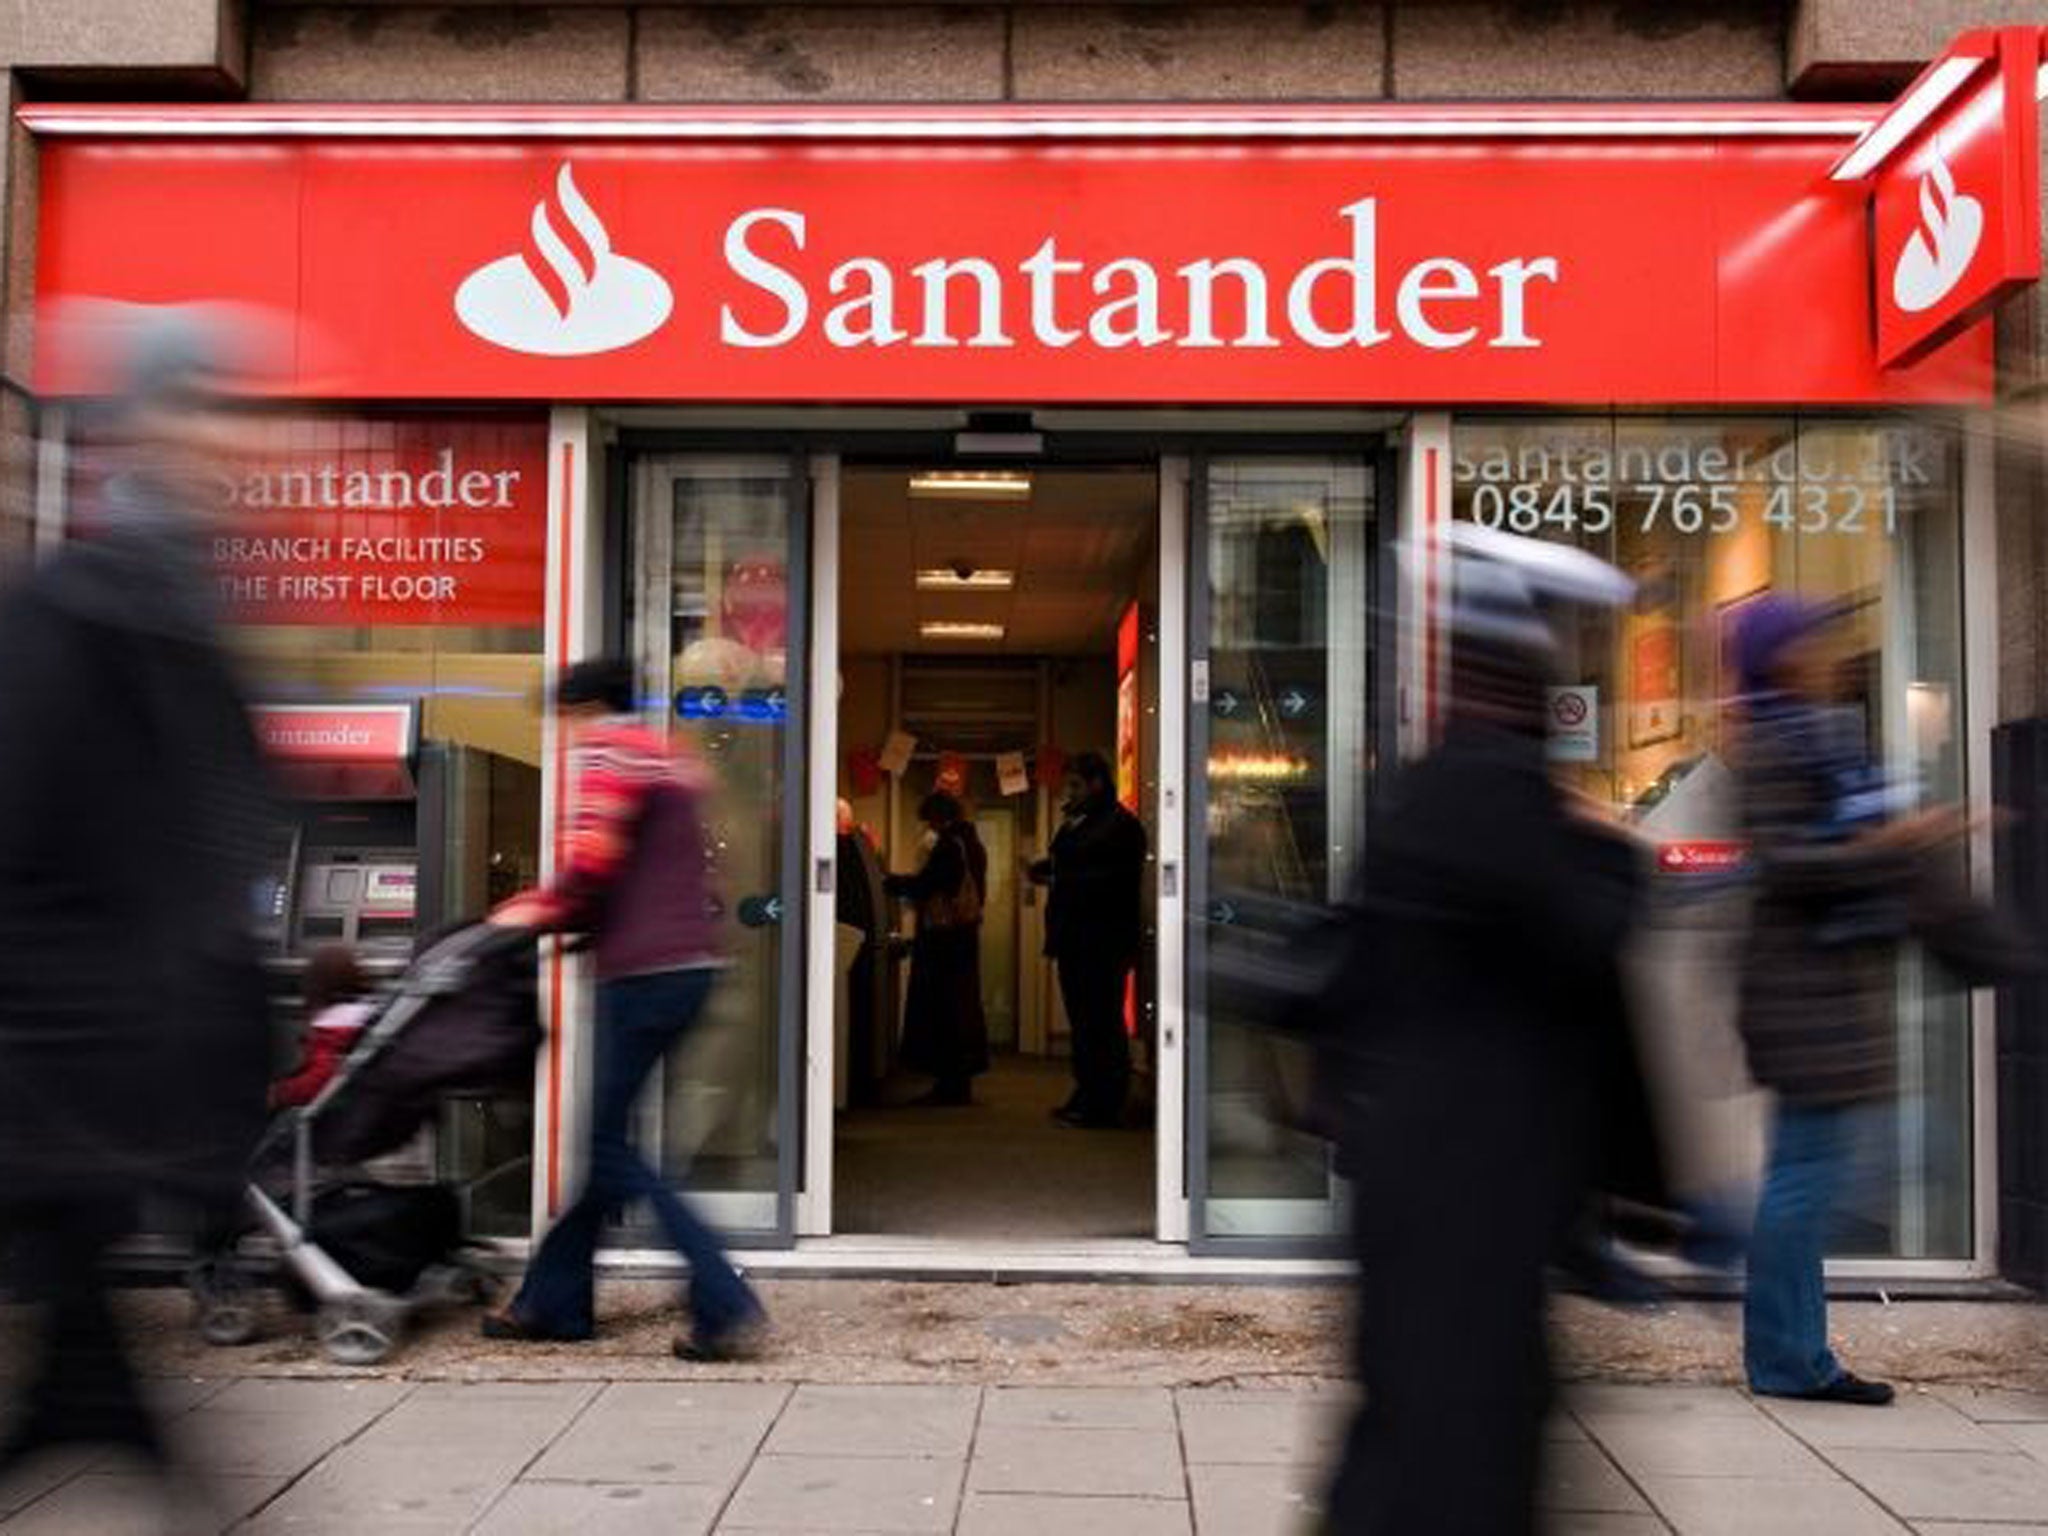 Santander 123 is attractive for those seeking interest on credit balances